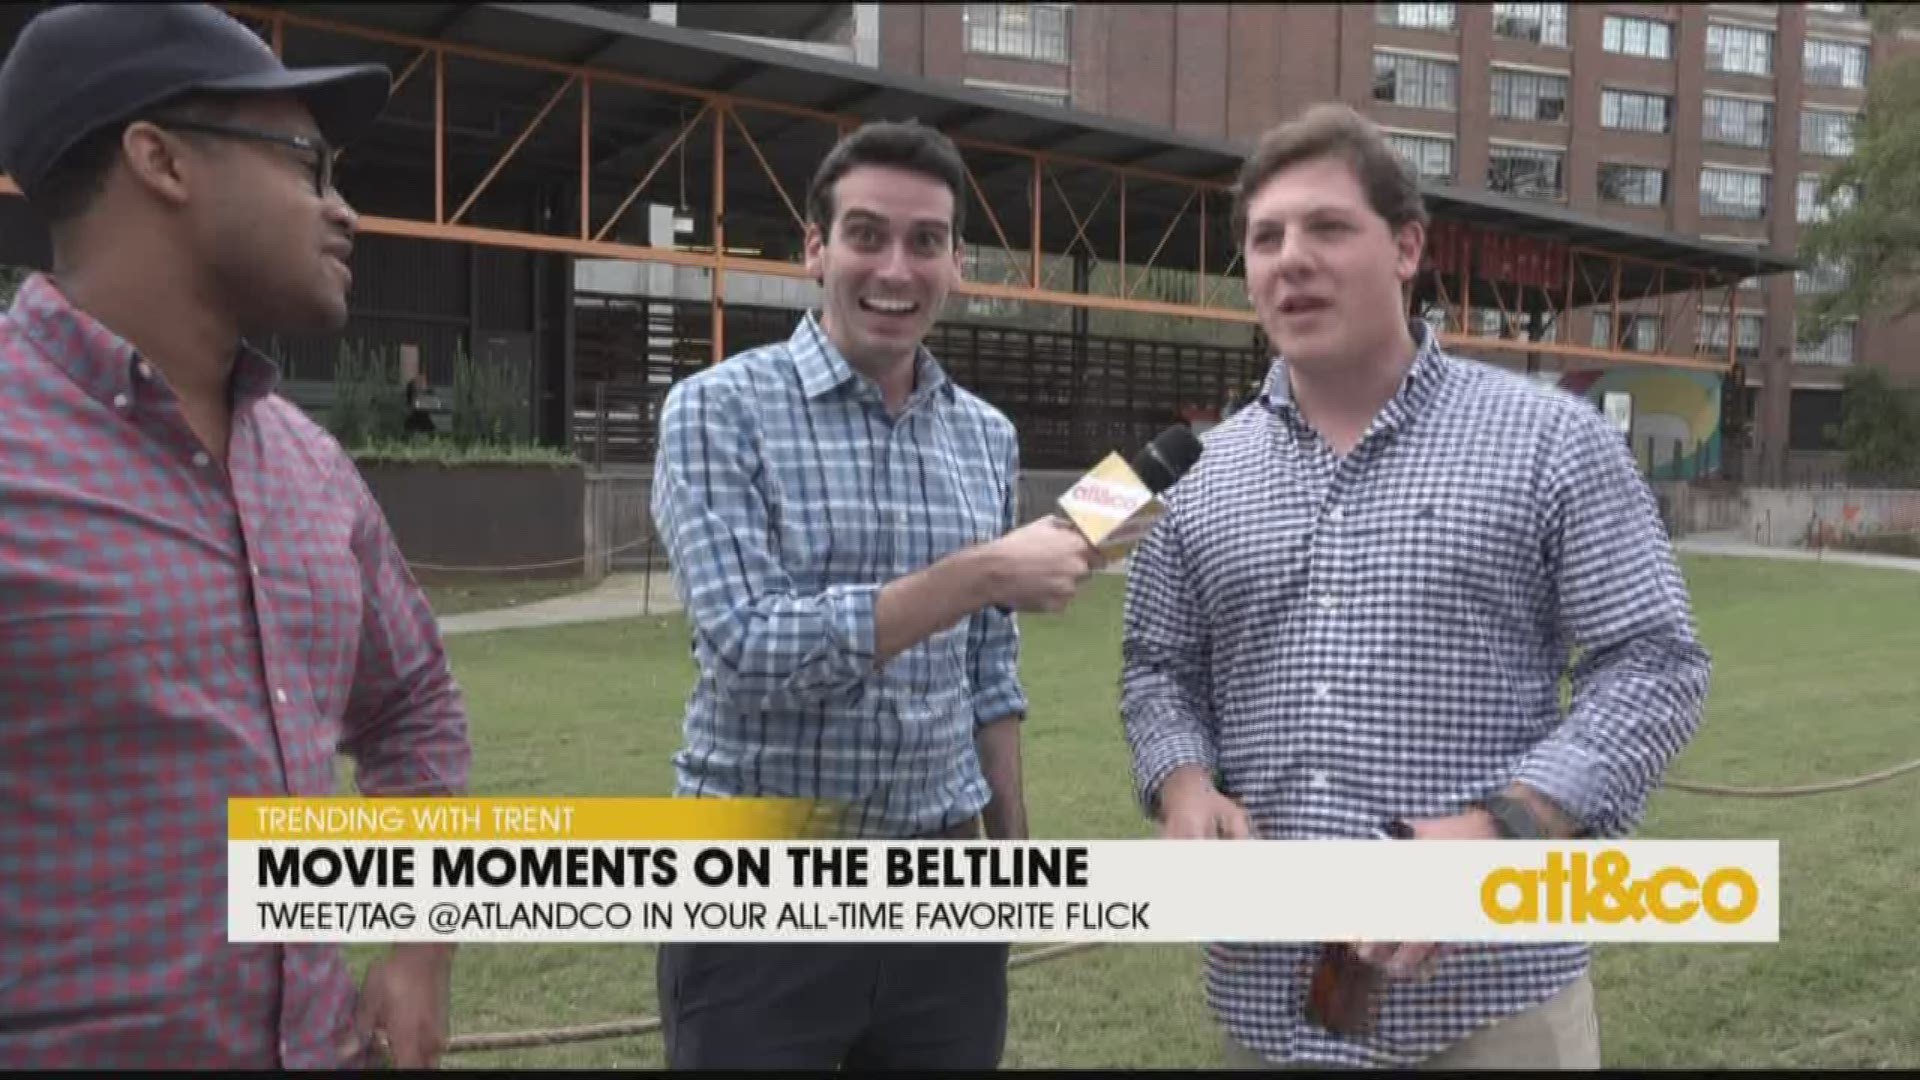 Trending with Trent goes up and down the BeltLine to ask the people about their all-time favorite flicks!